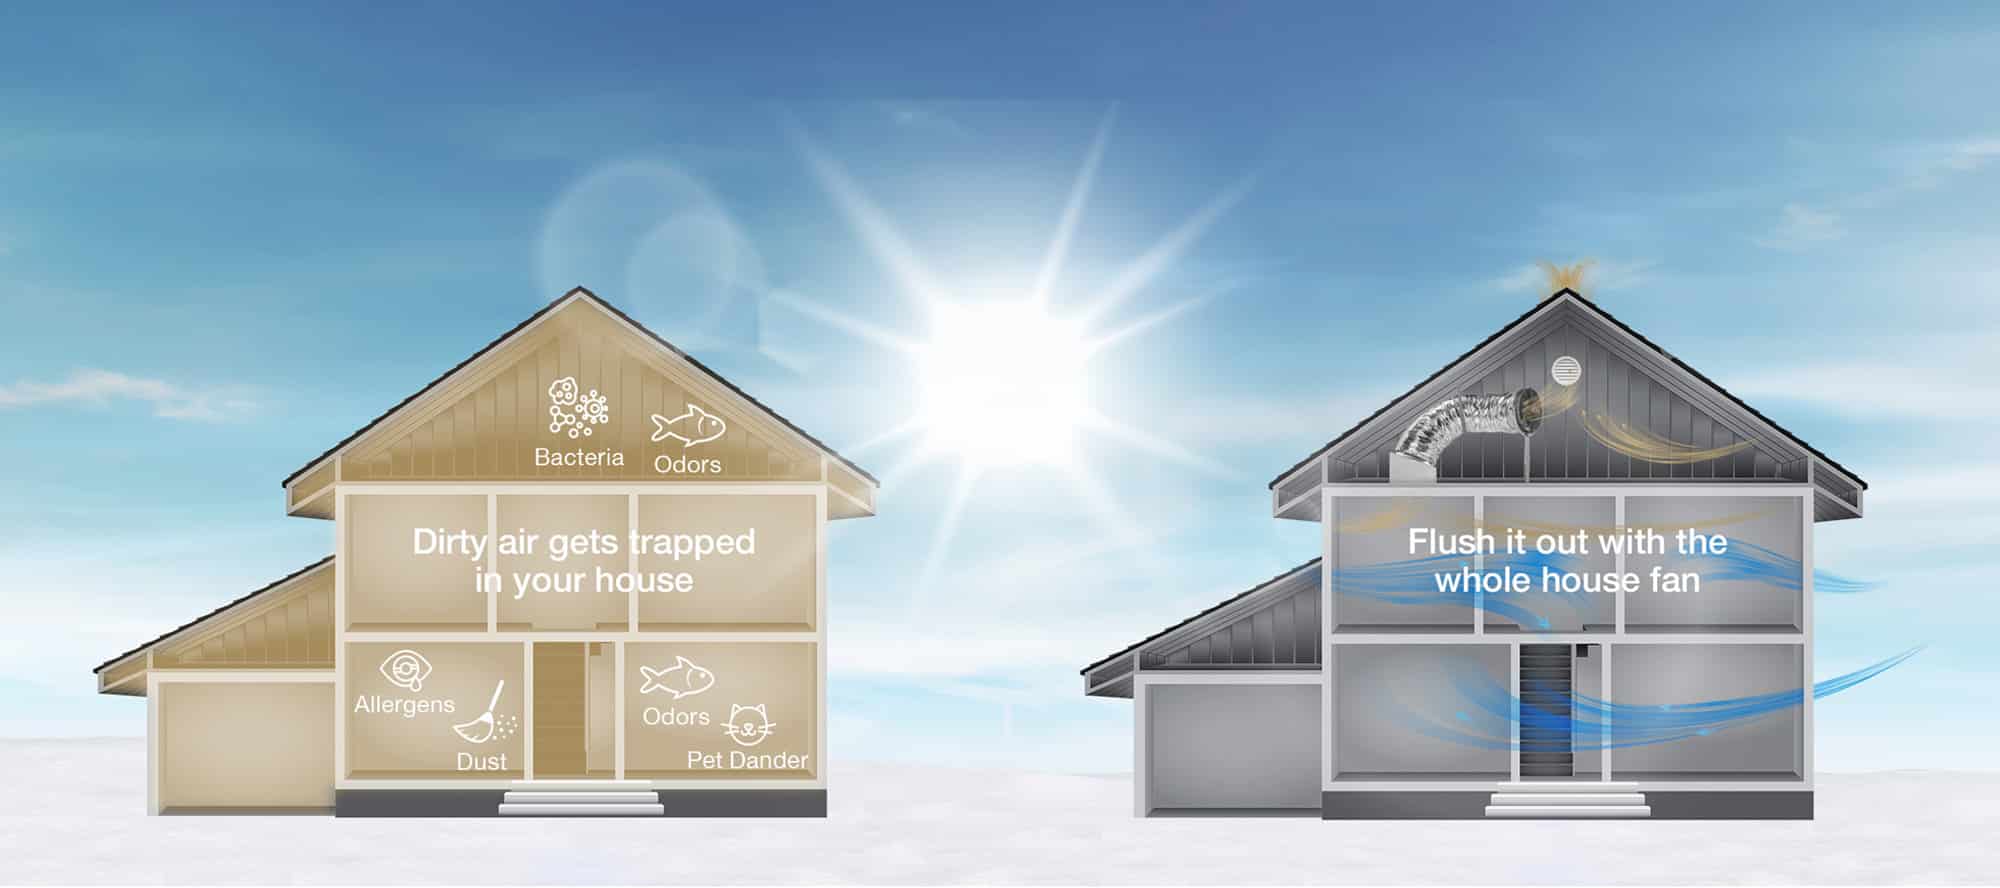 Solatube skylight graphic about saving energy during winter